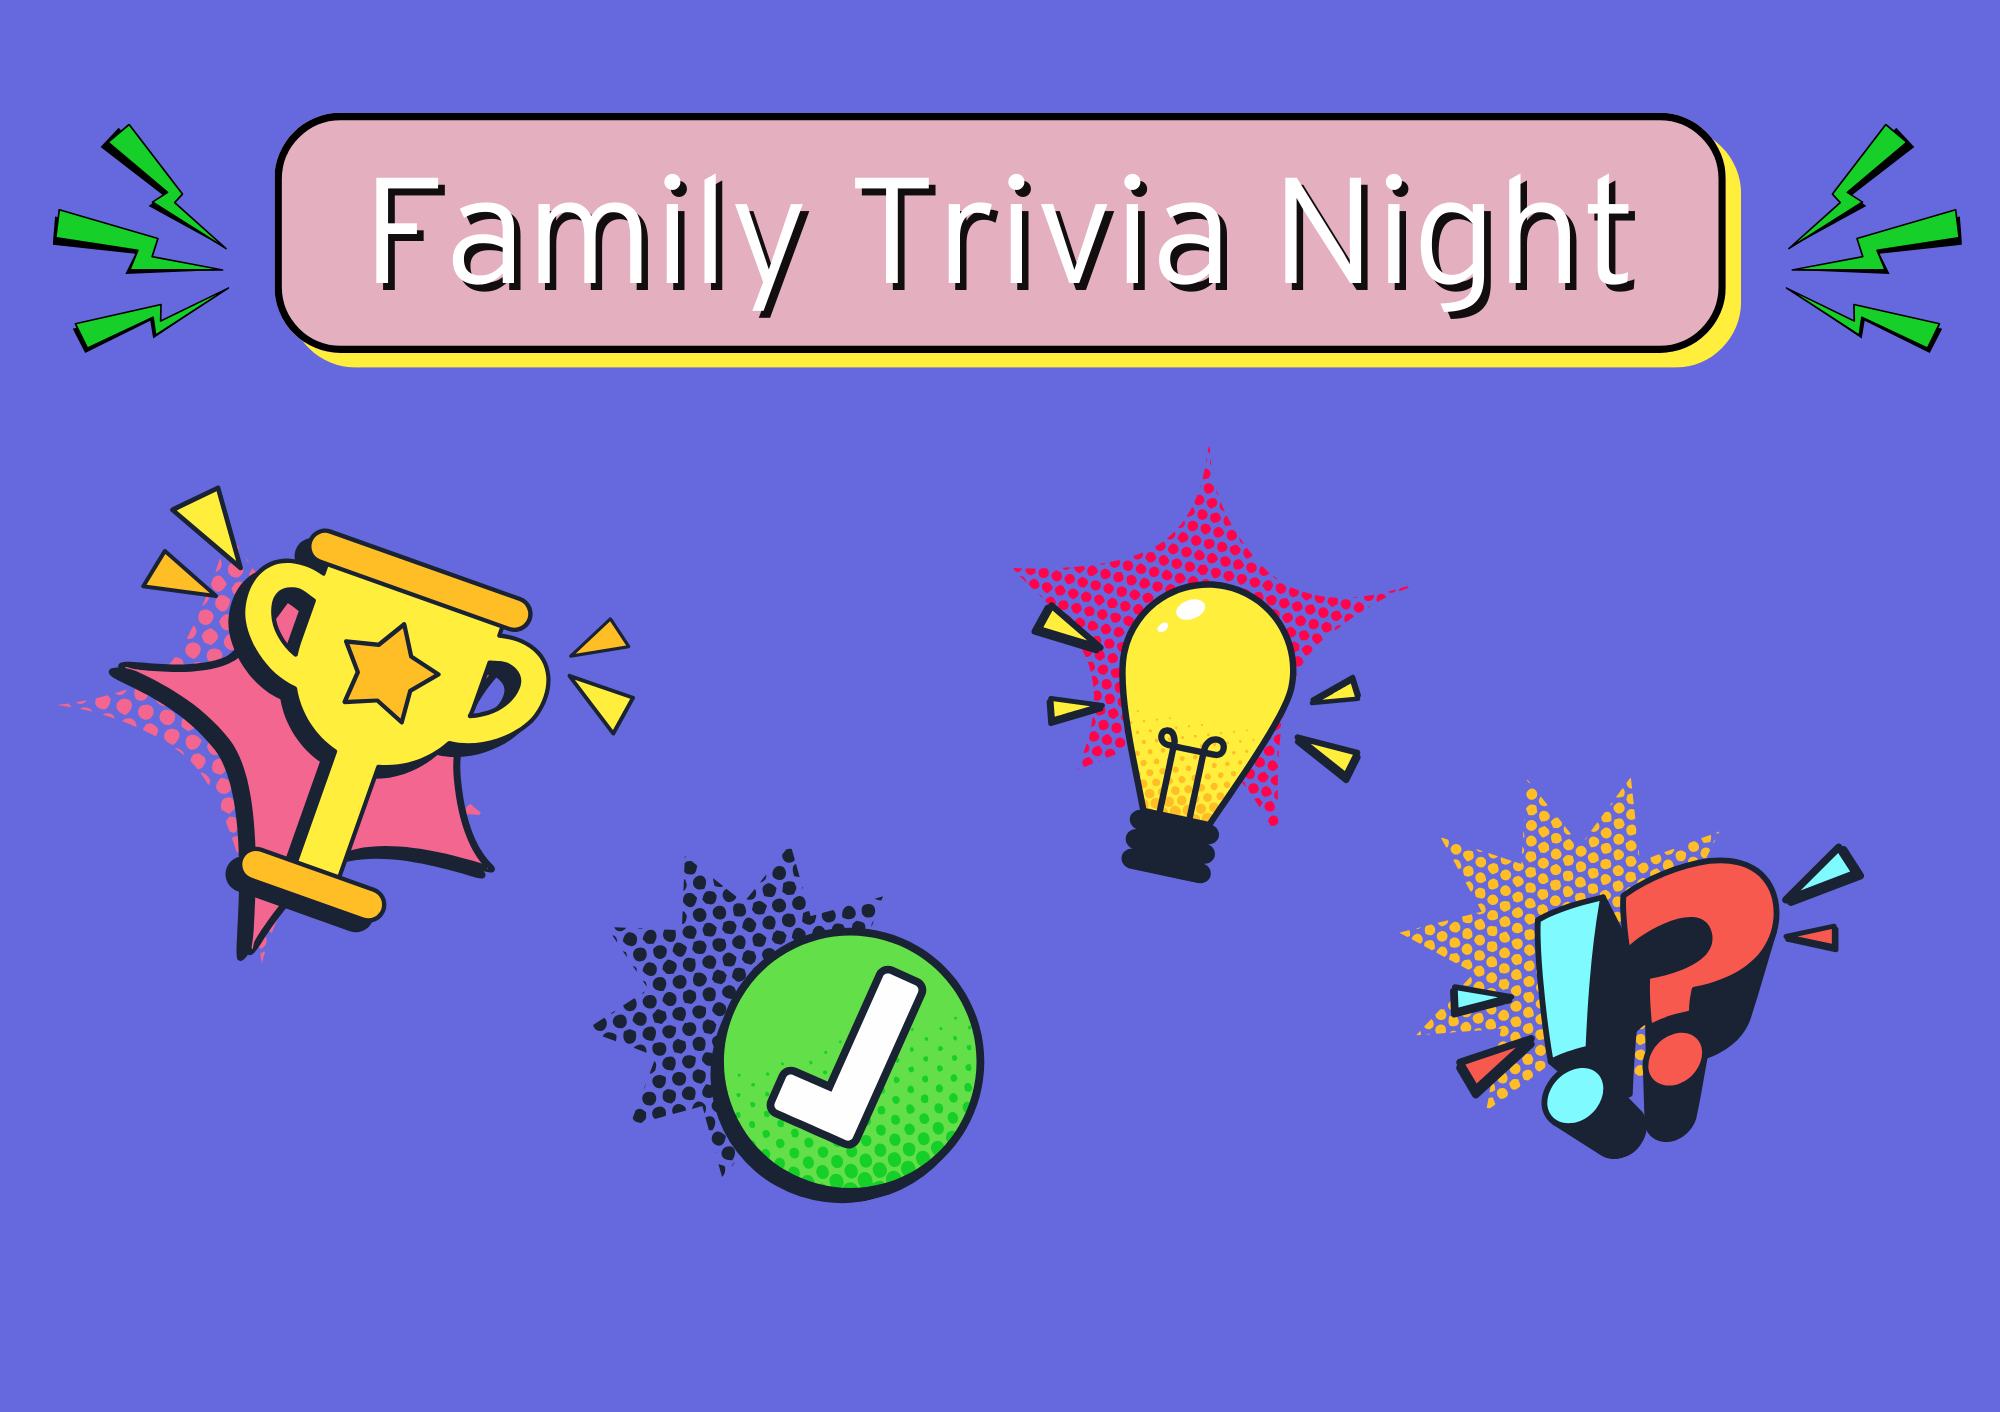 'Family trivia night' with comic-styled graphics around it (trophy, lightbulb, question mark)